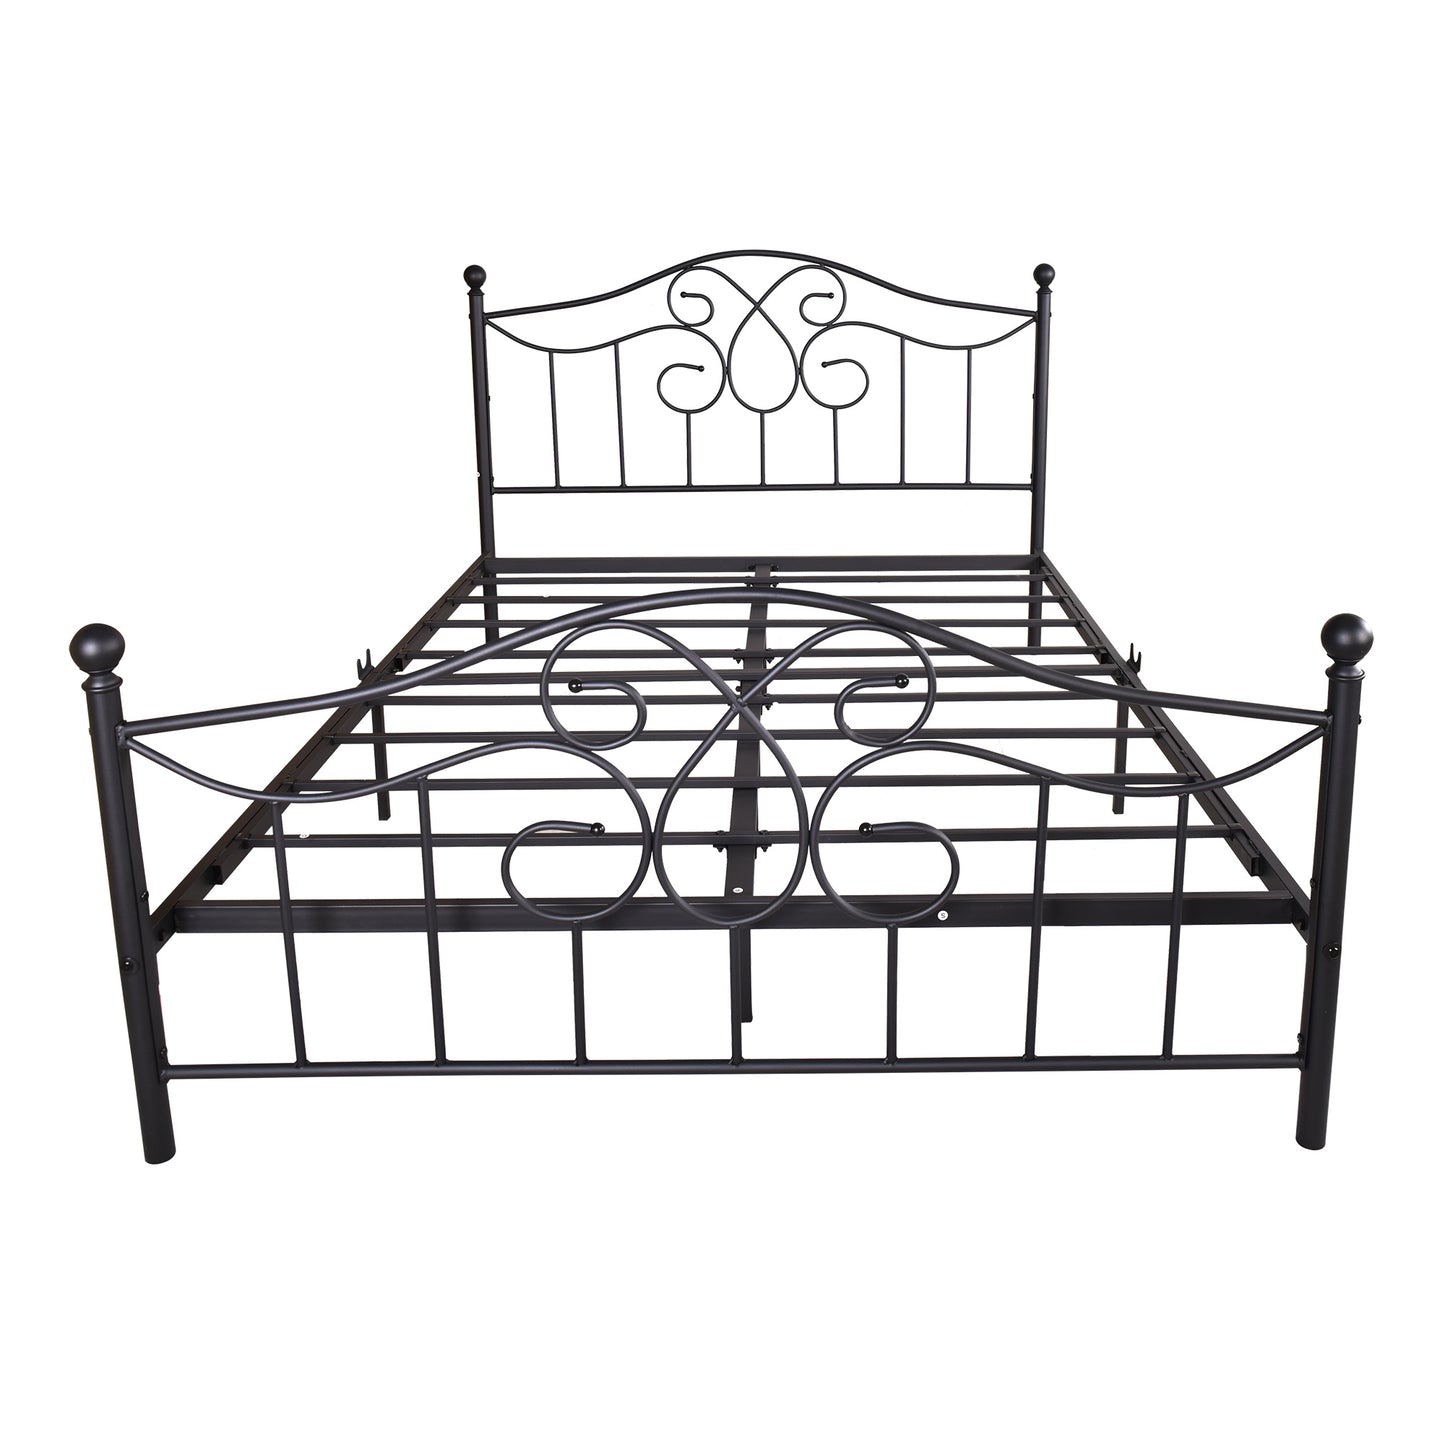 Queen Metal bed frame, No Box Spring Needed with Vintage Headboard and Footboard Premium Steel Slat Support Mattress Foundation, Black